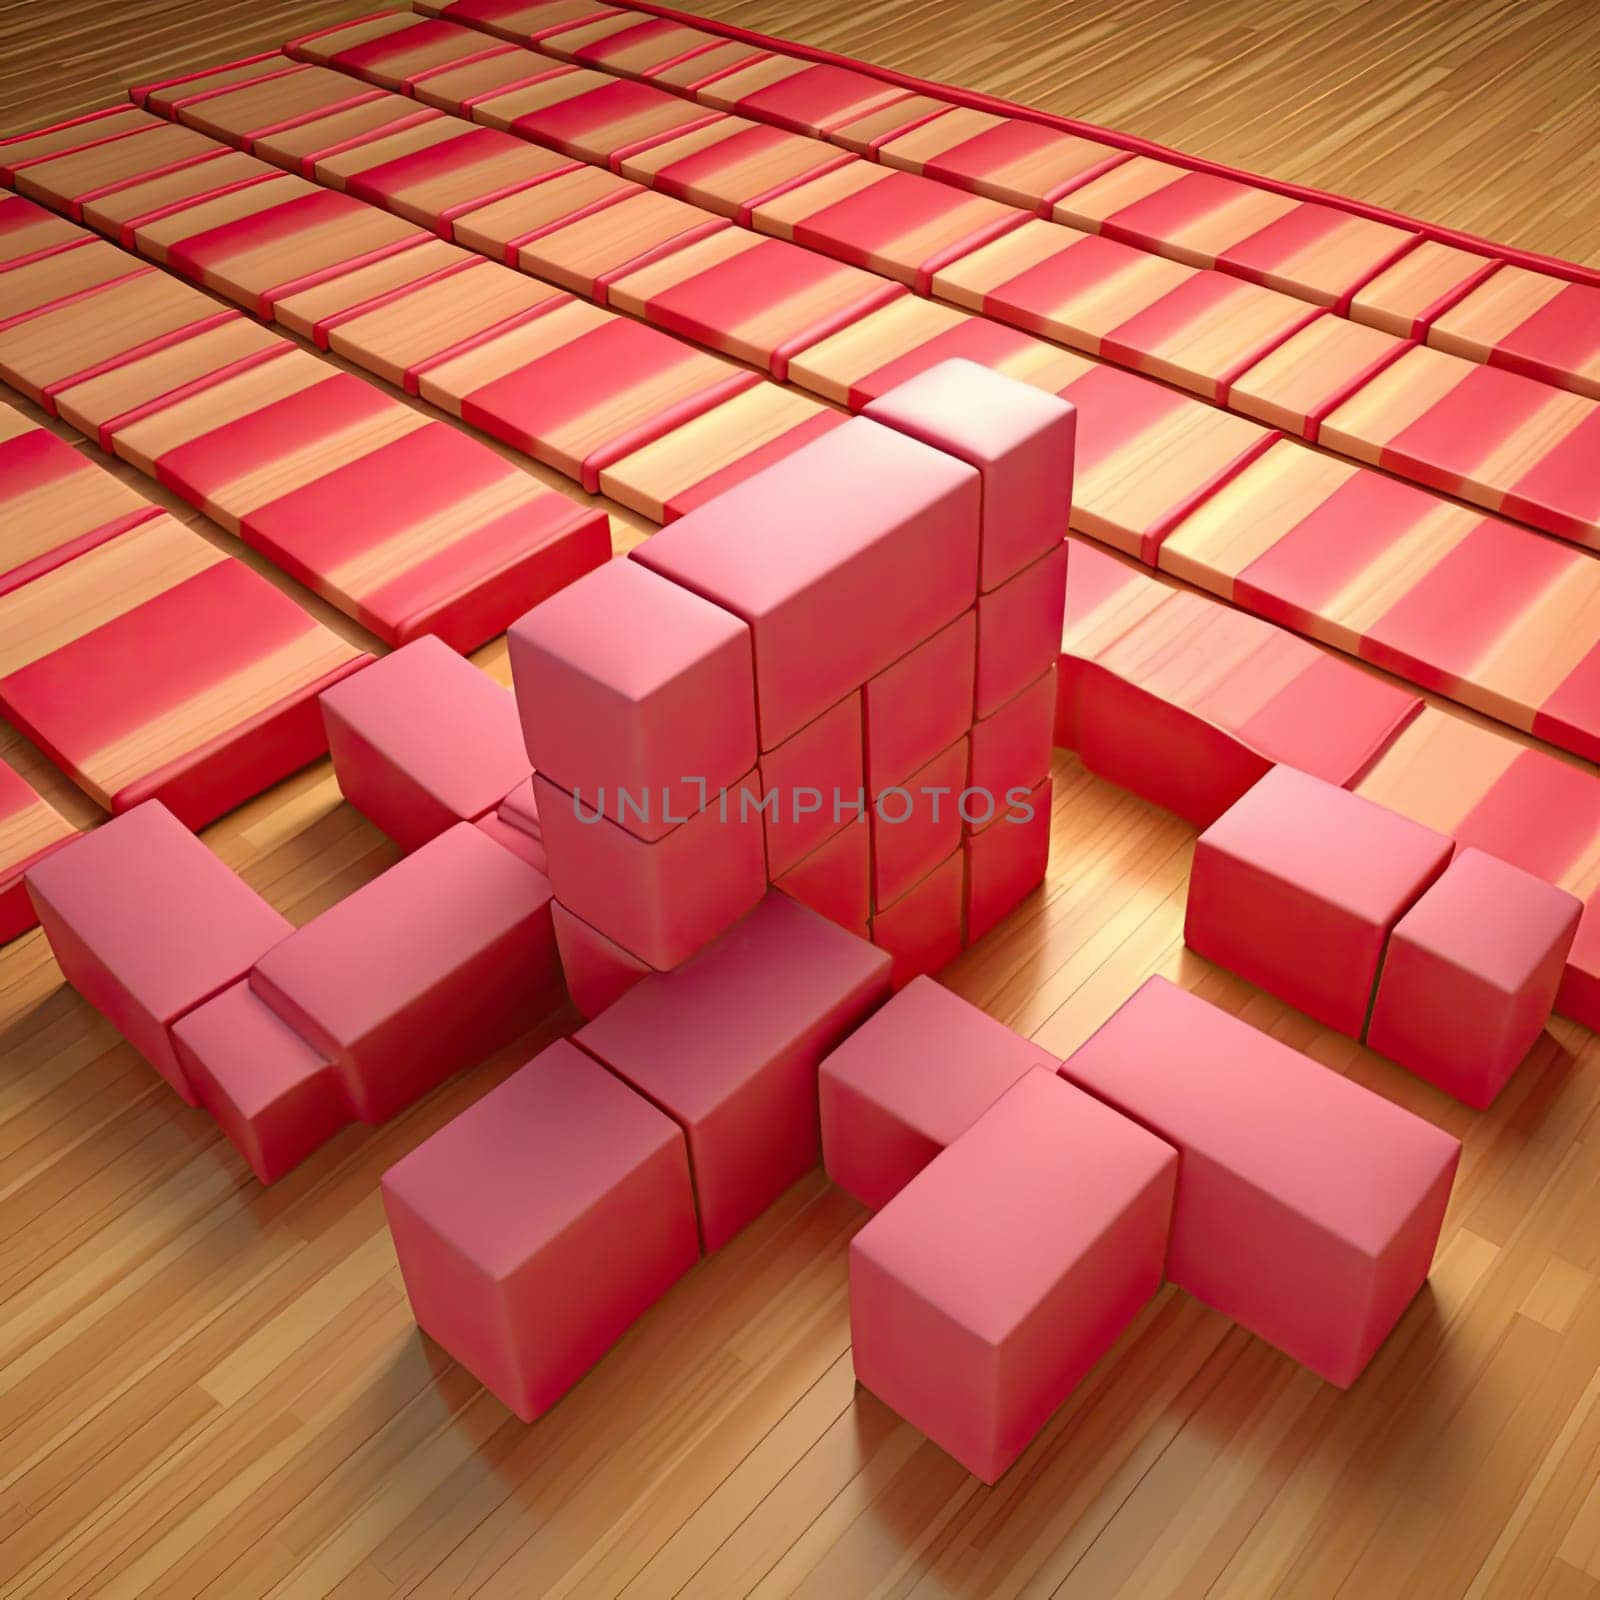 Red cubes on wooden floor - 3D illustration - perspective view by eduardobellotto